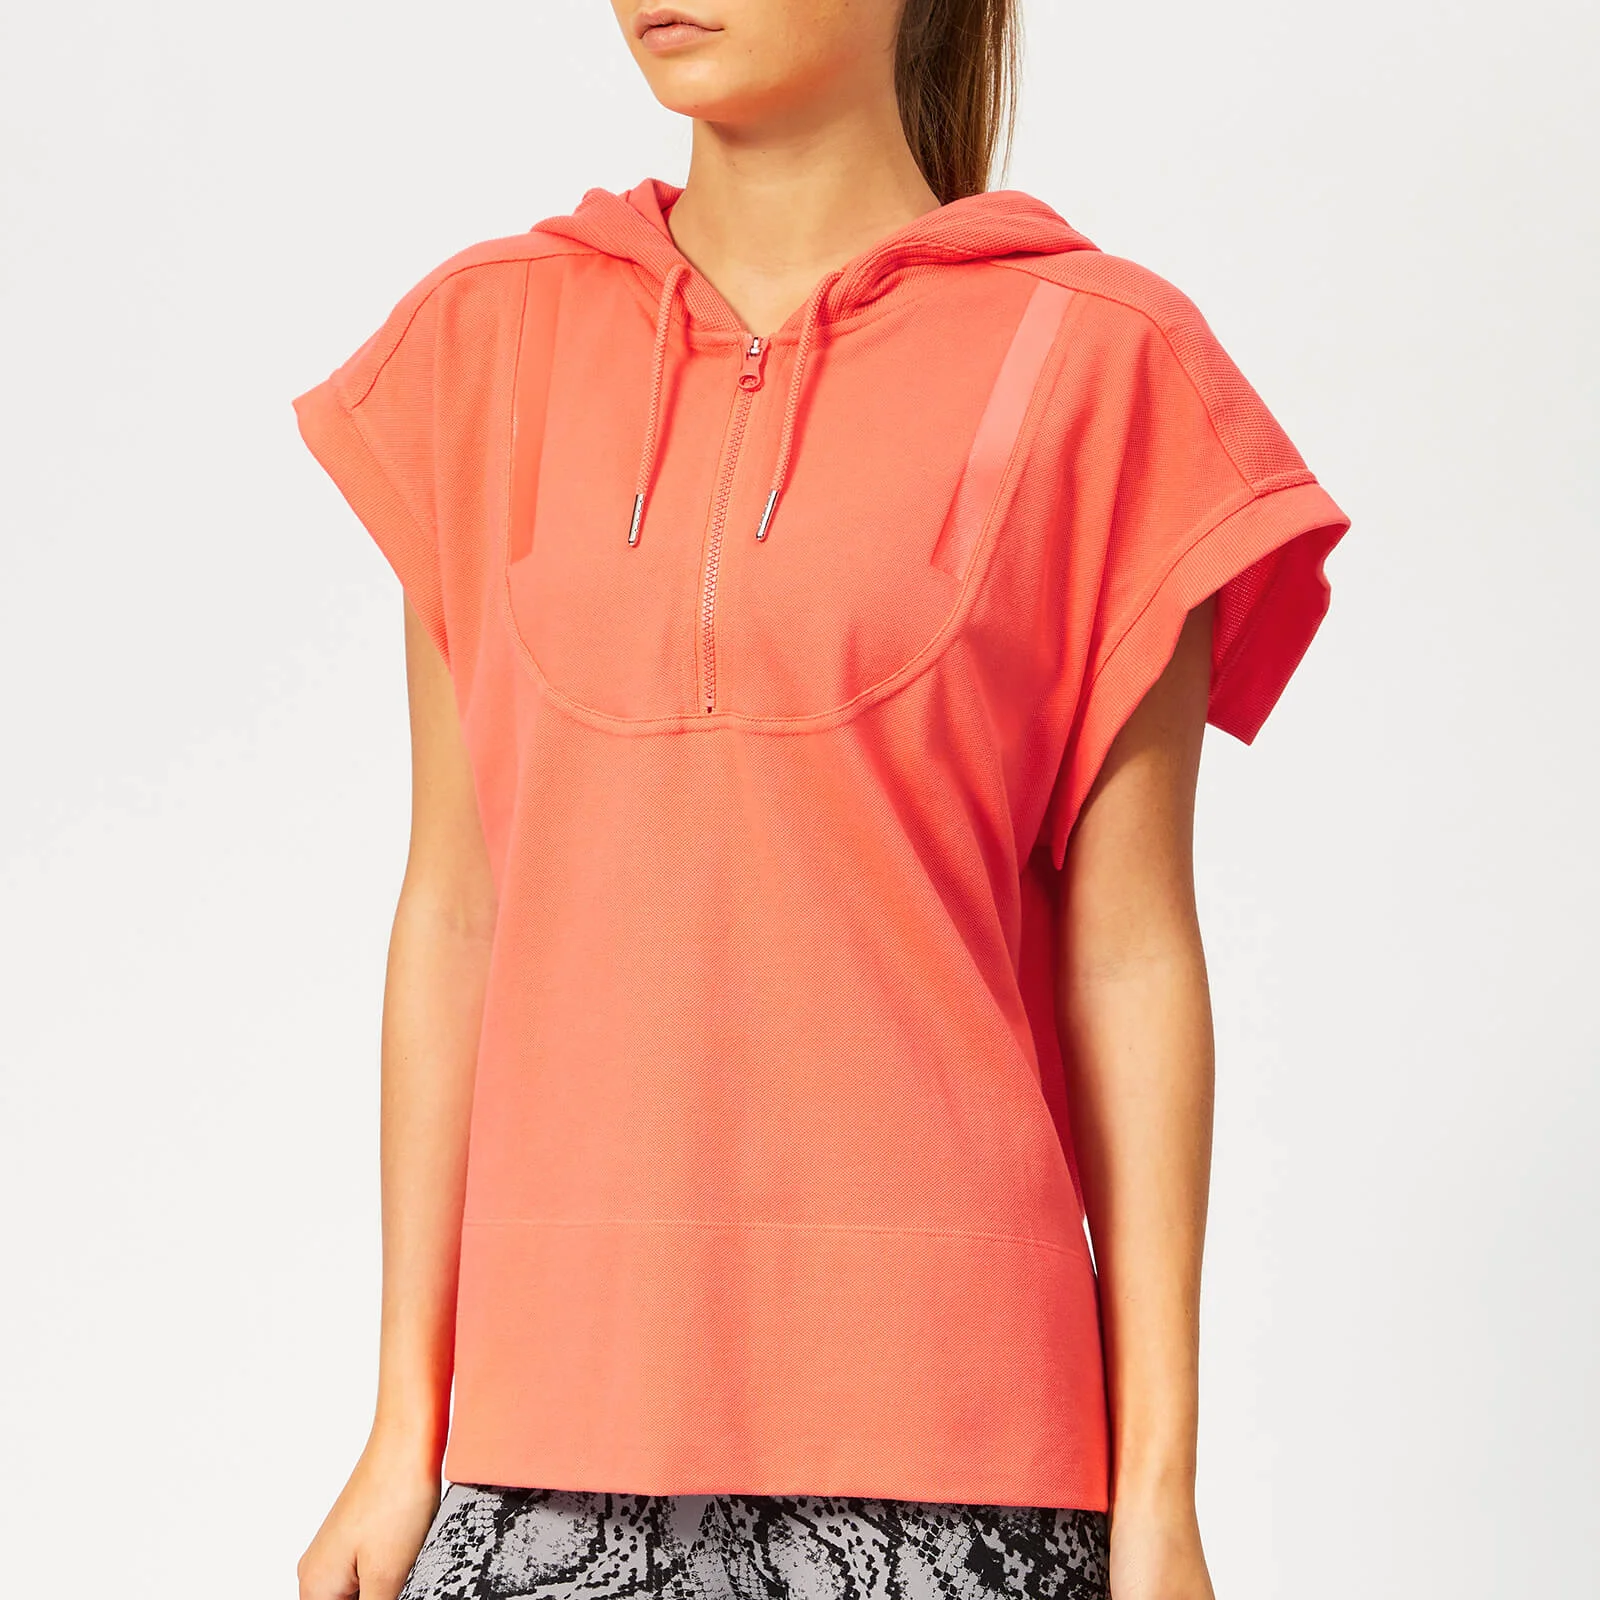 adidas by Stella McCartney Women's Hooded Short Sleeve T-Shirt - Hot Coral Image 1